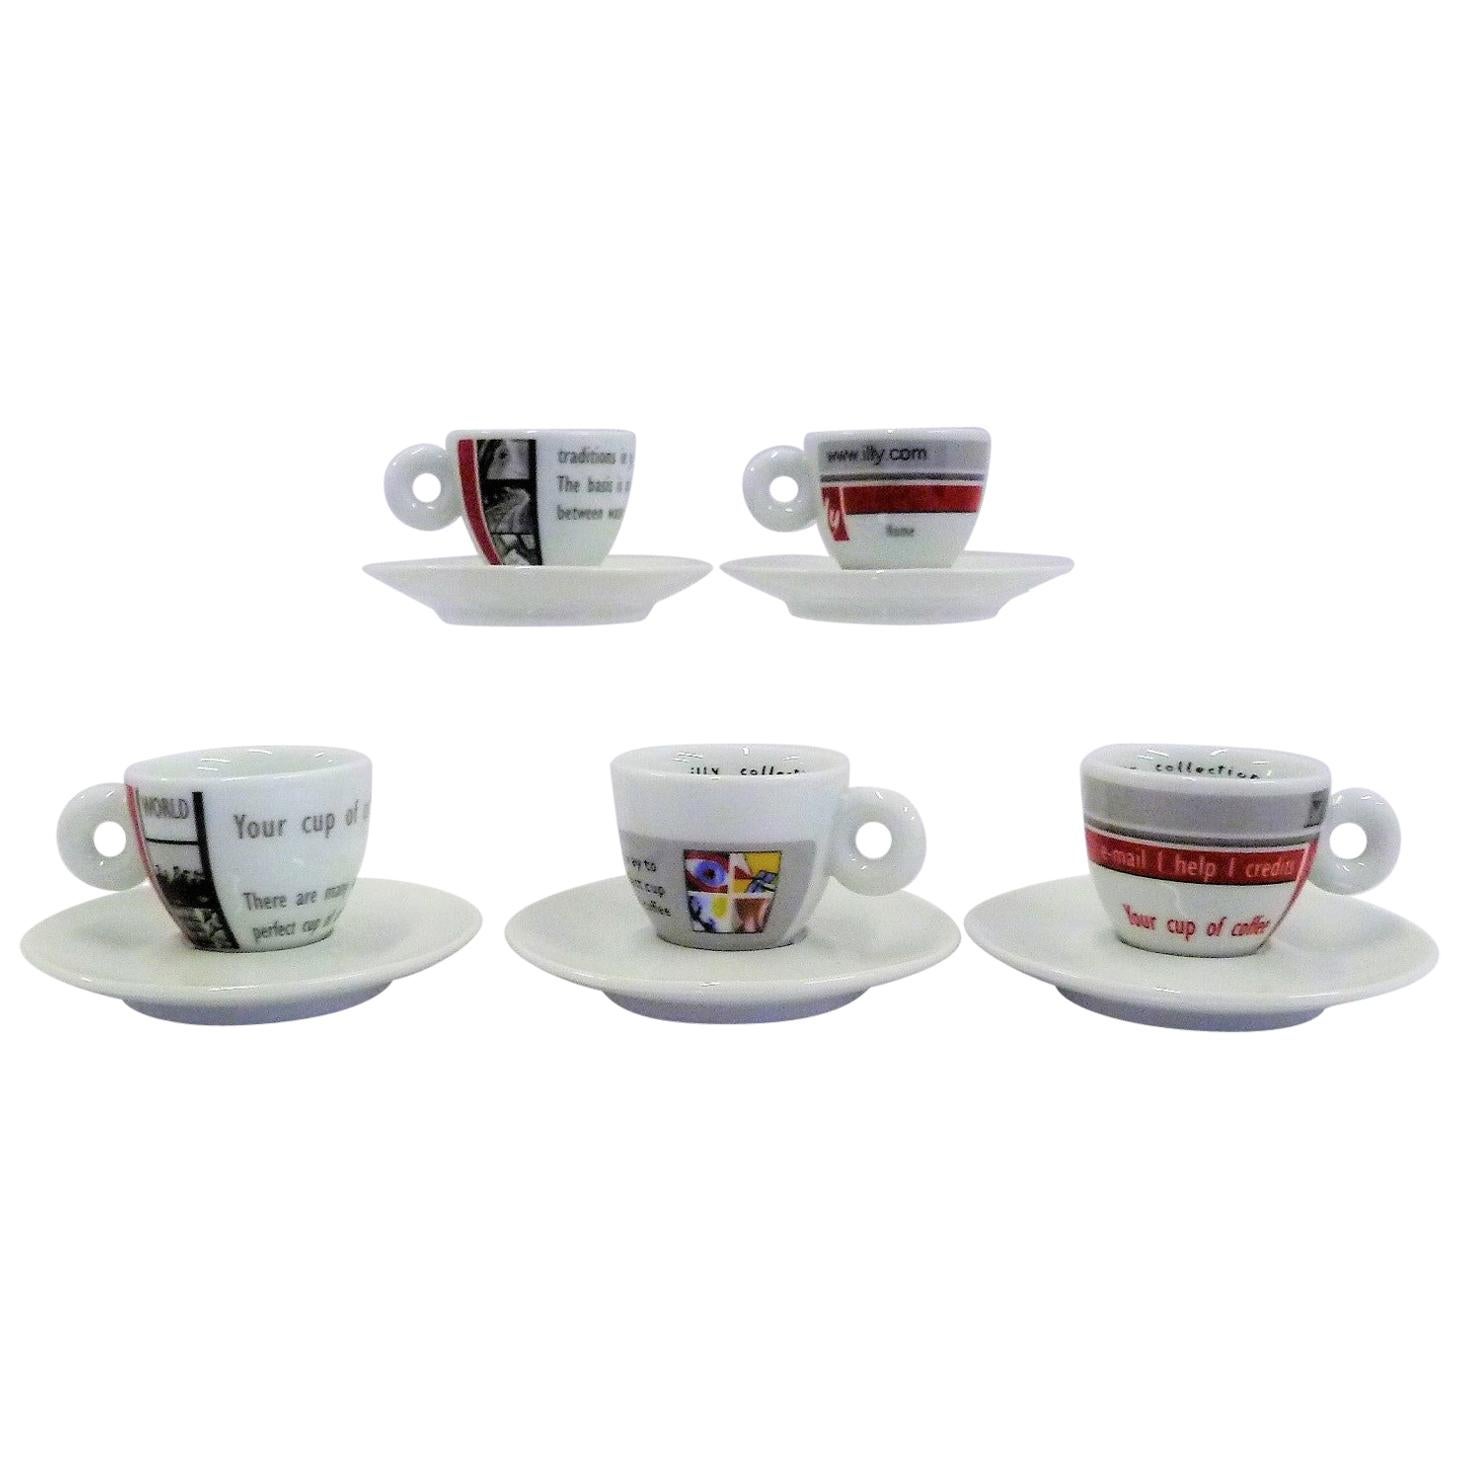 Illy Collection, No Water No Coffee, Maria Joao Calisto 2002 Espresso Cups  at 1stDibs